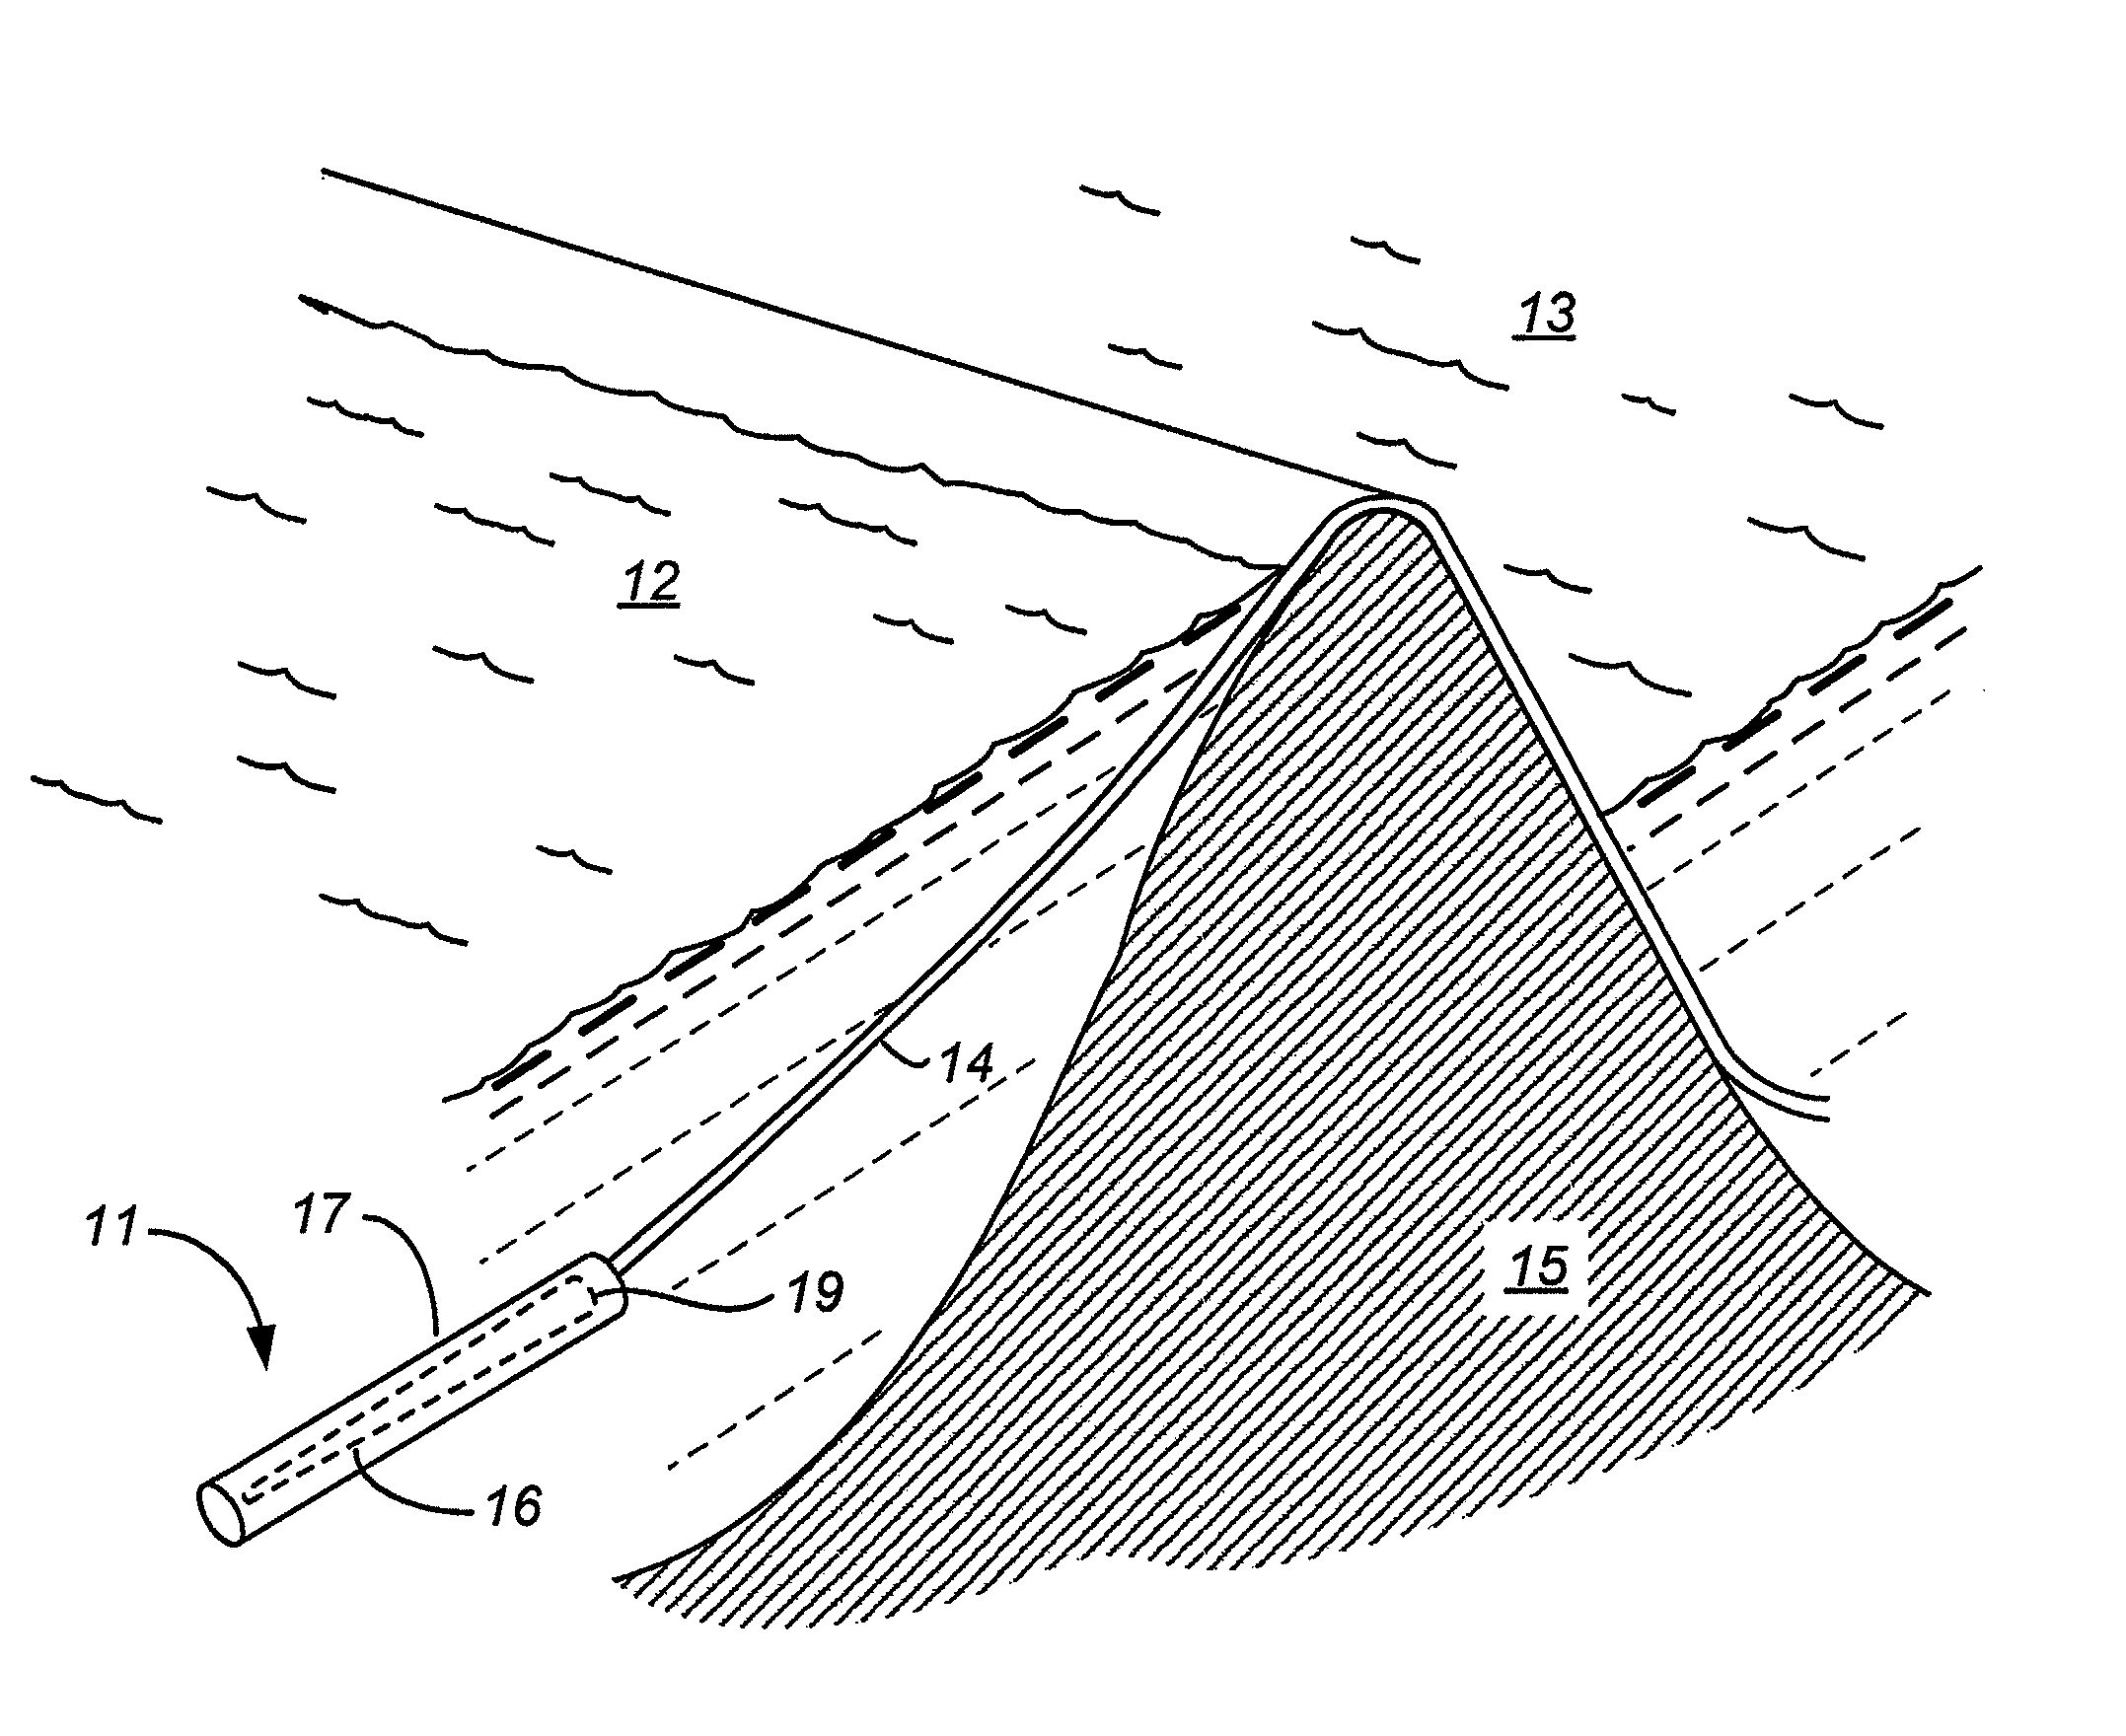 Barrel-type fish/particle screen with adjustable flow distribution and debris removal